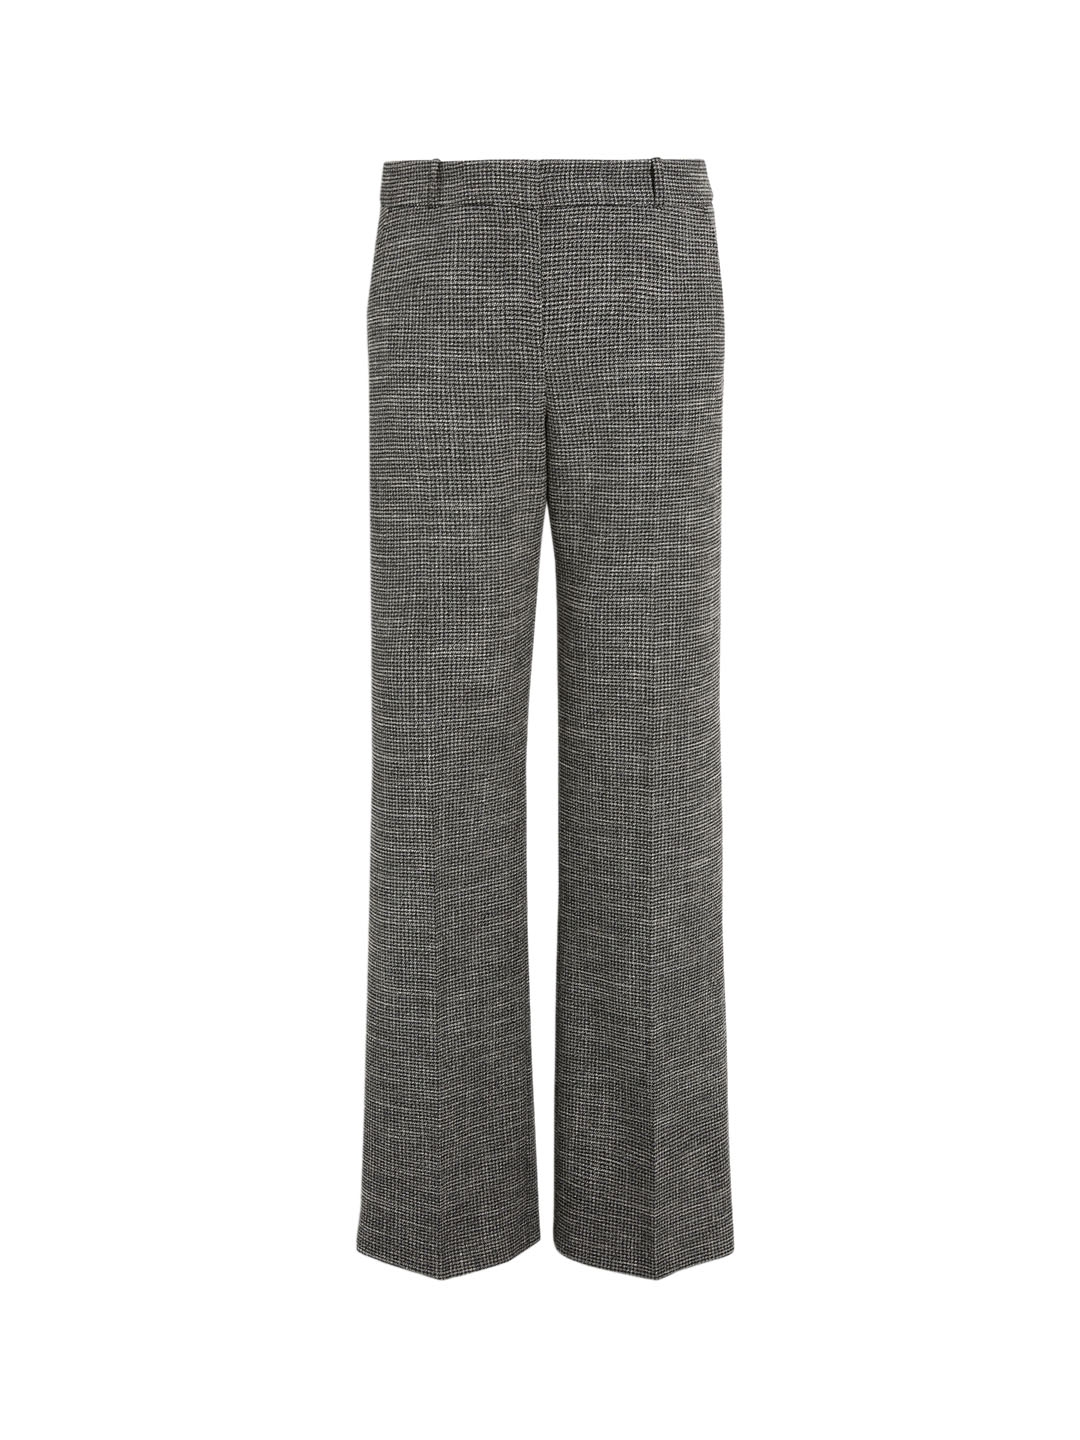 Buy Next Women Grey Slouchy Regular Fit Checked Formal Trousers ...